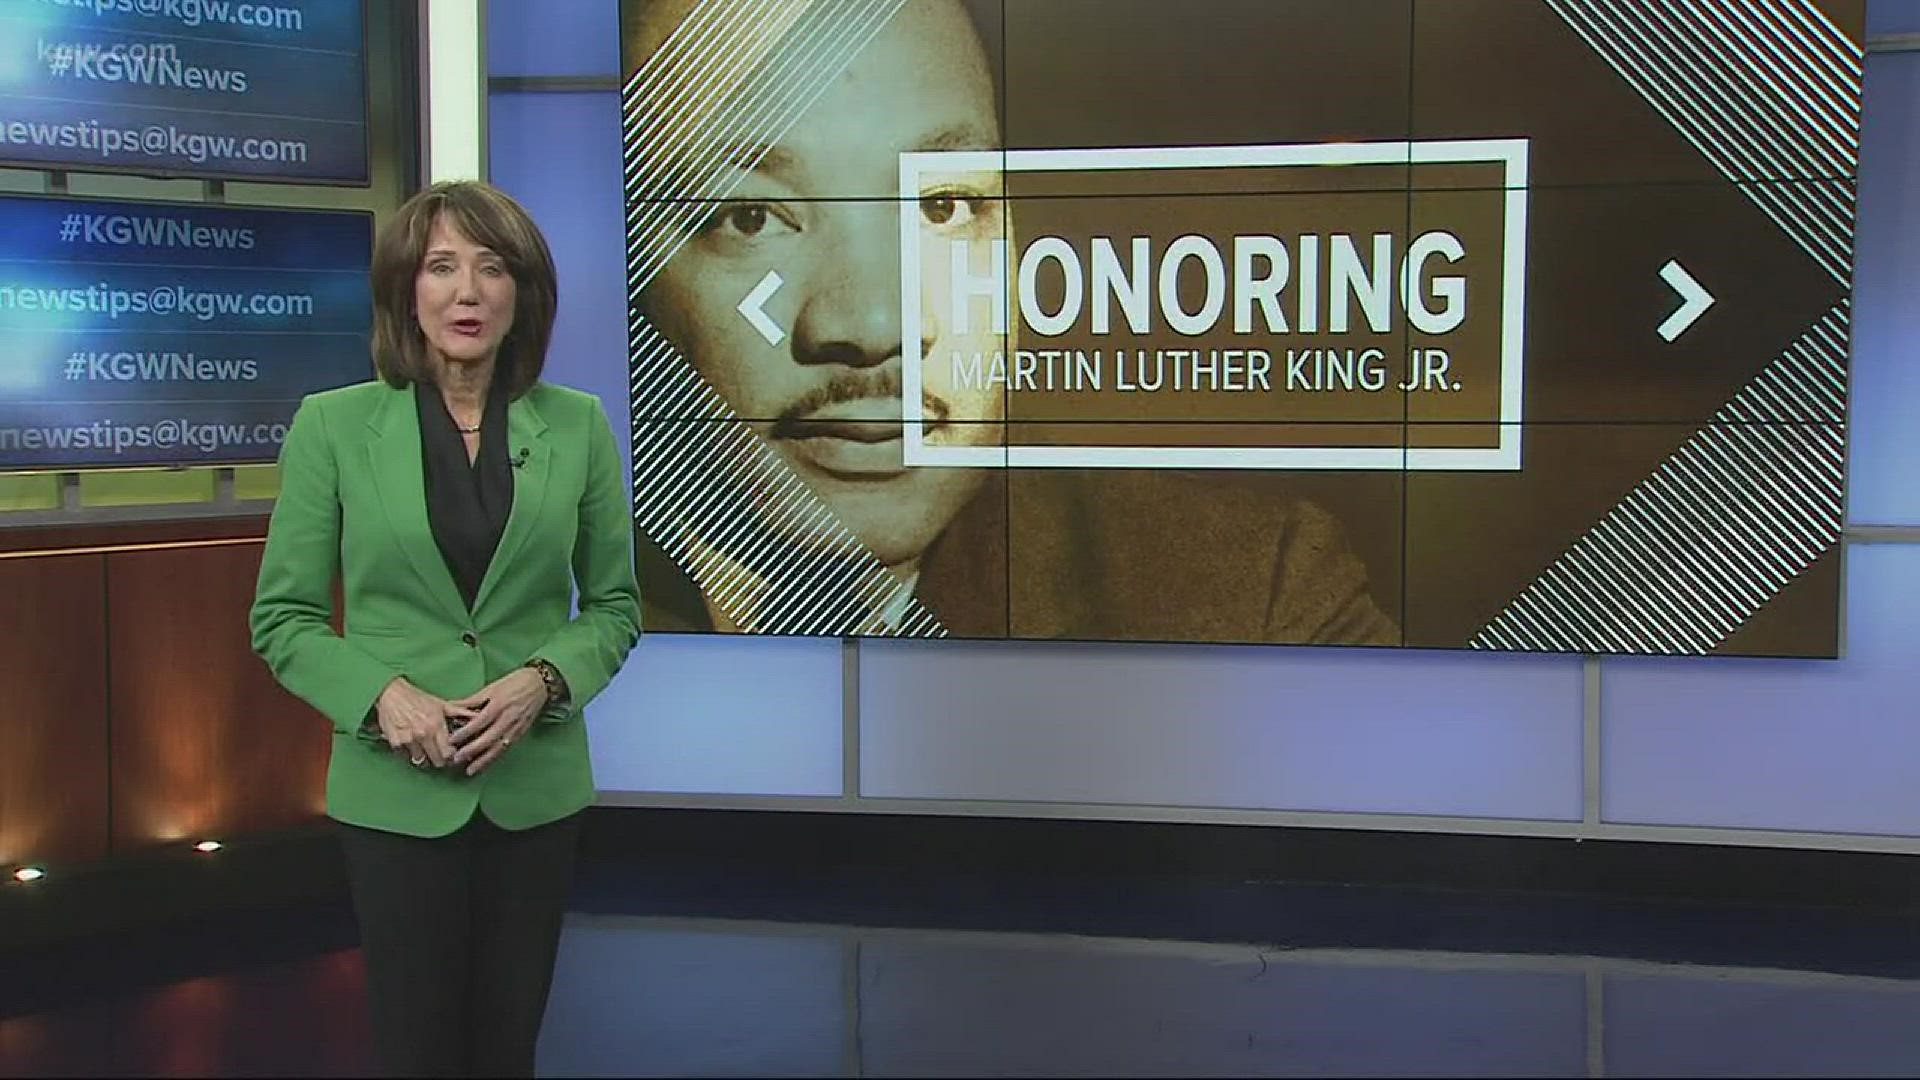 Martin Luther King Jr. School in Portland was one of the very first schools in the country to be named after the slain civil rights leader.